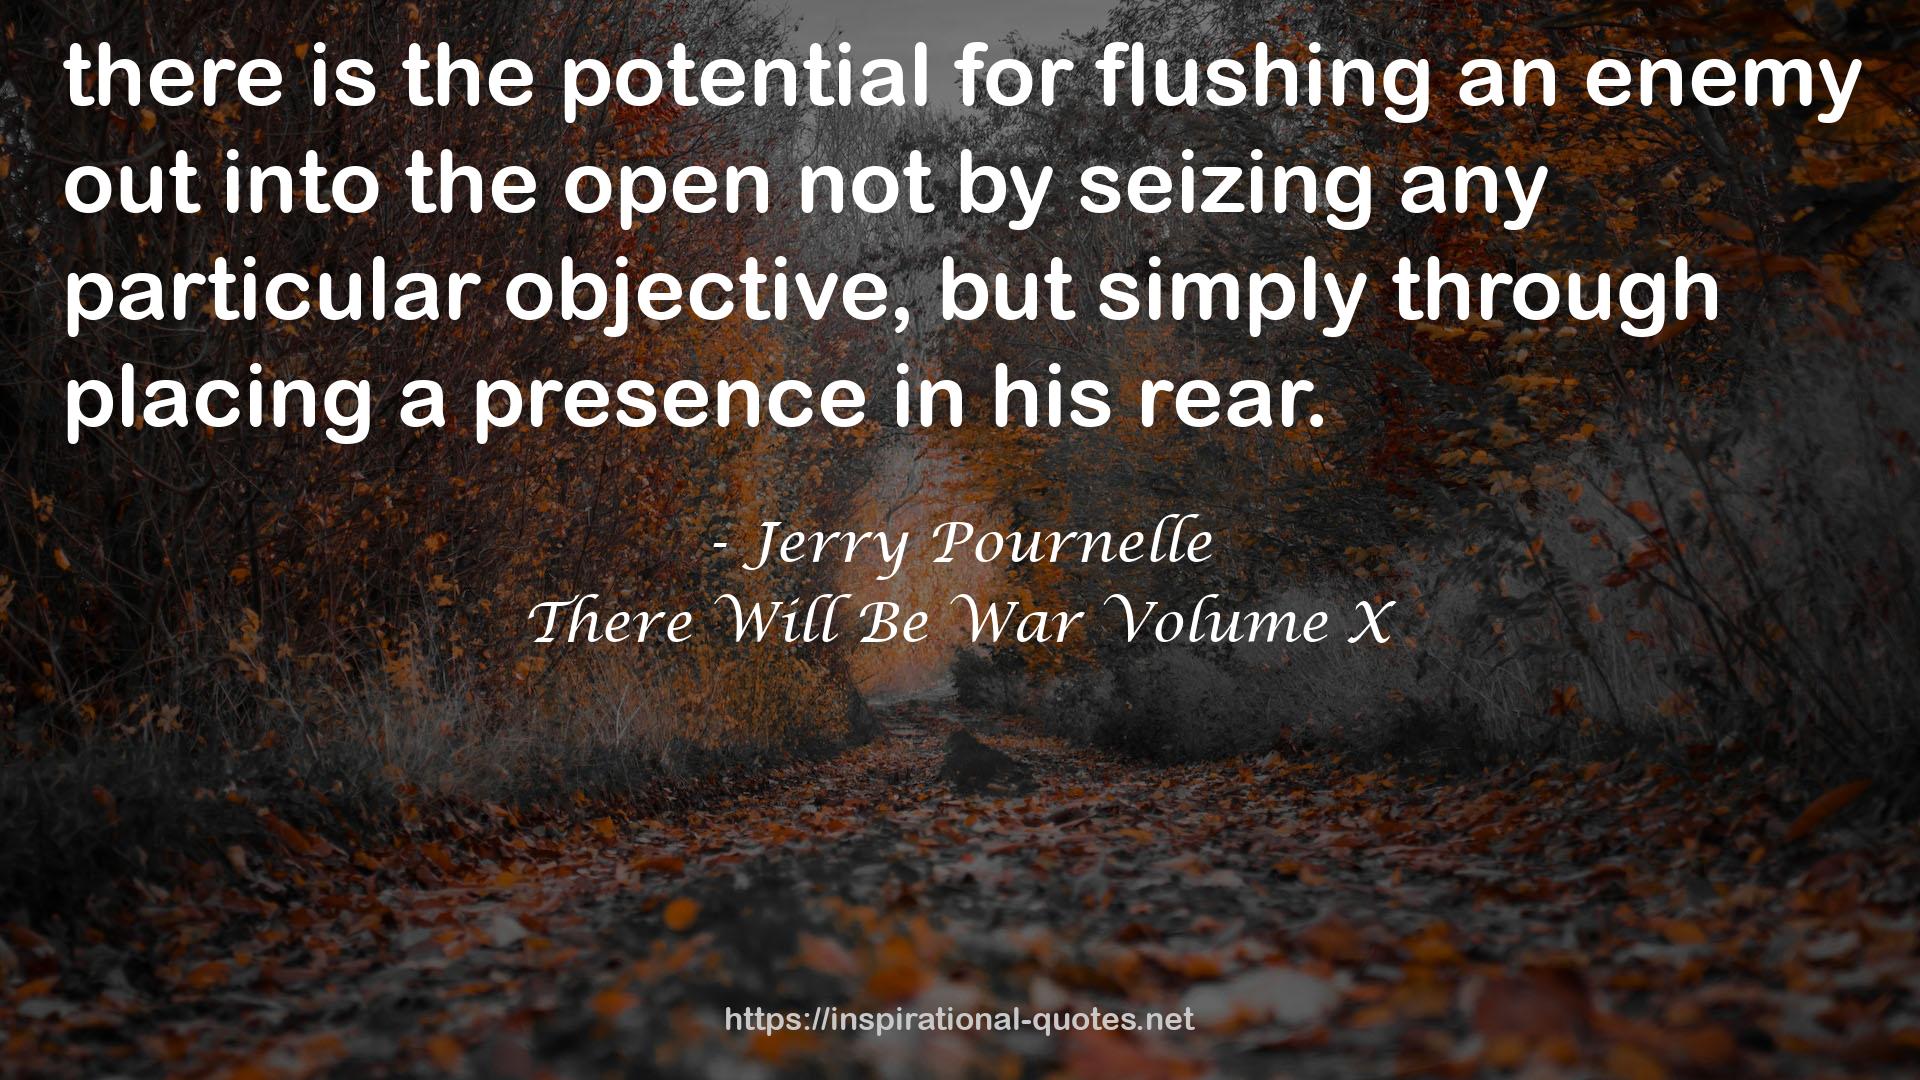 There Will Be War Volume X QUOTES